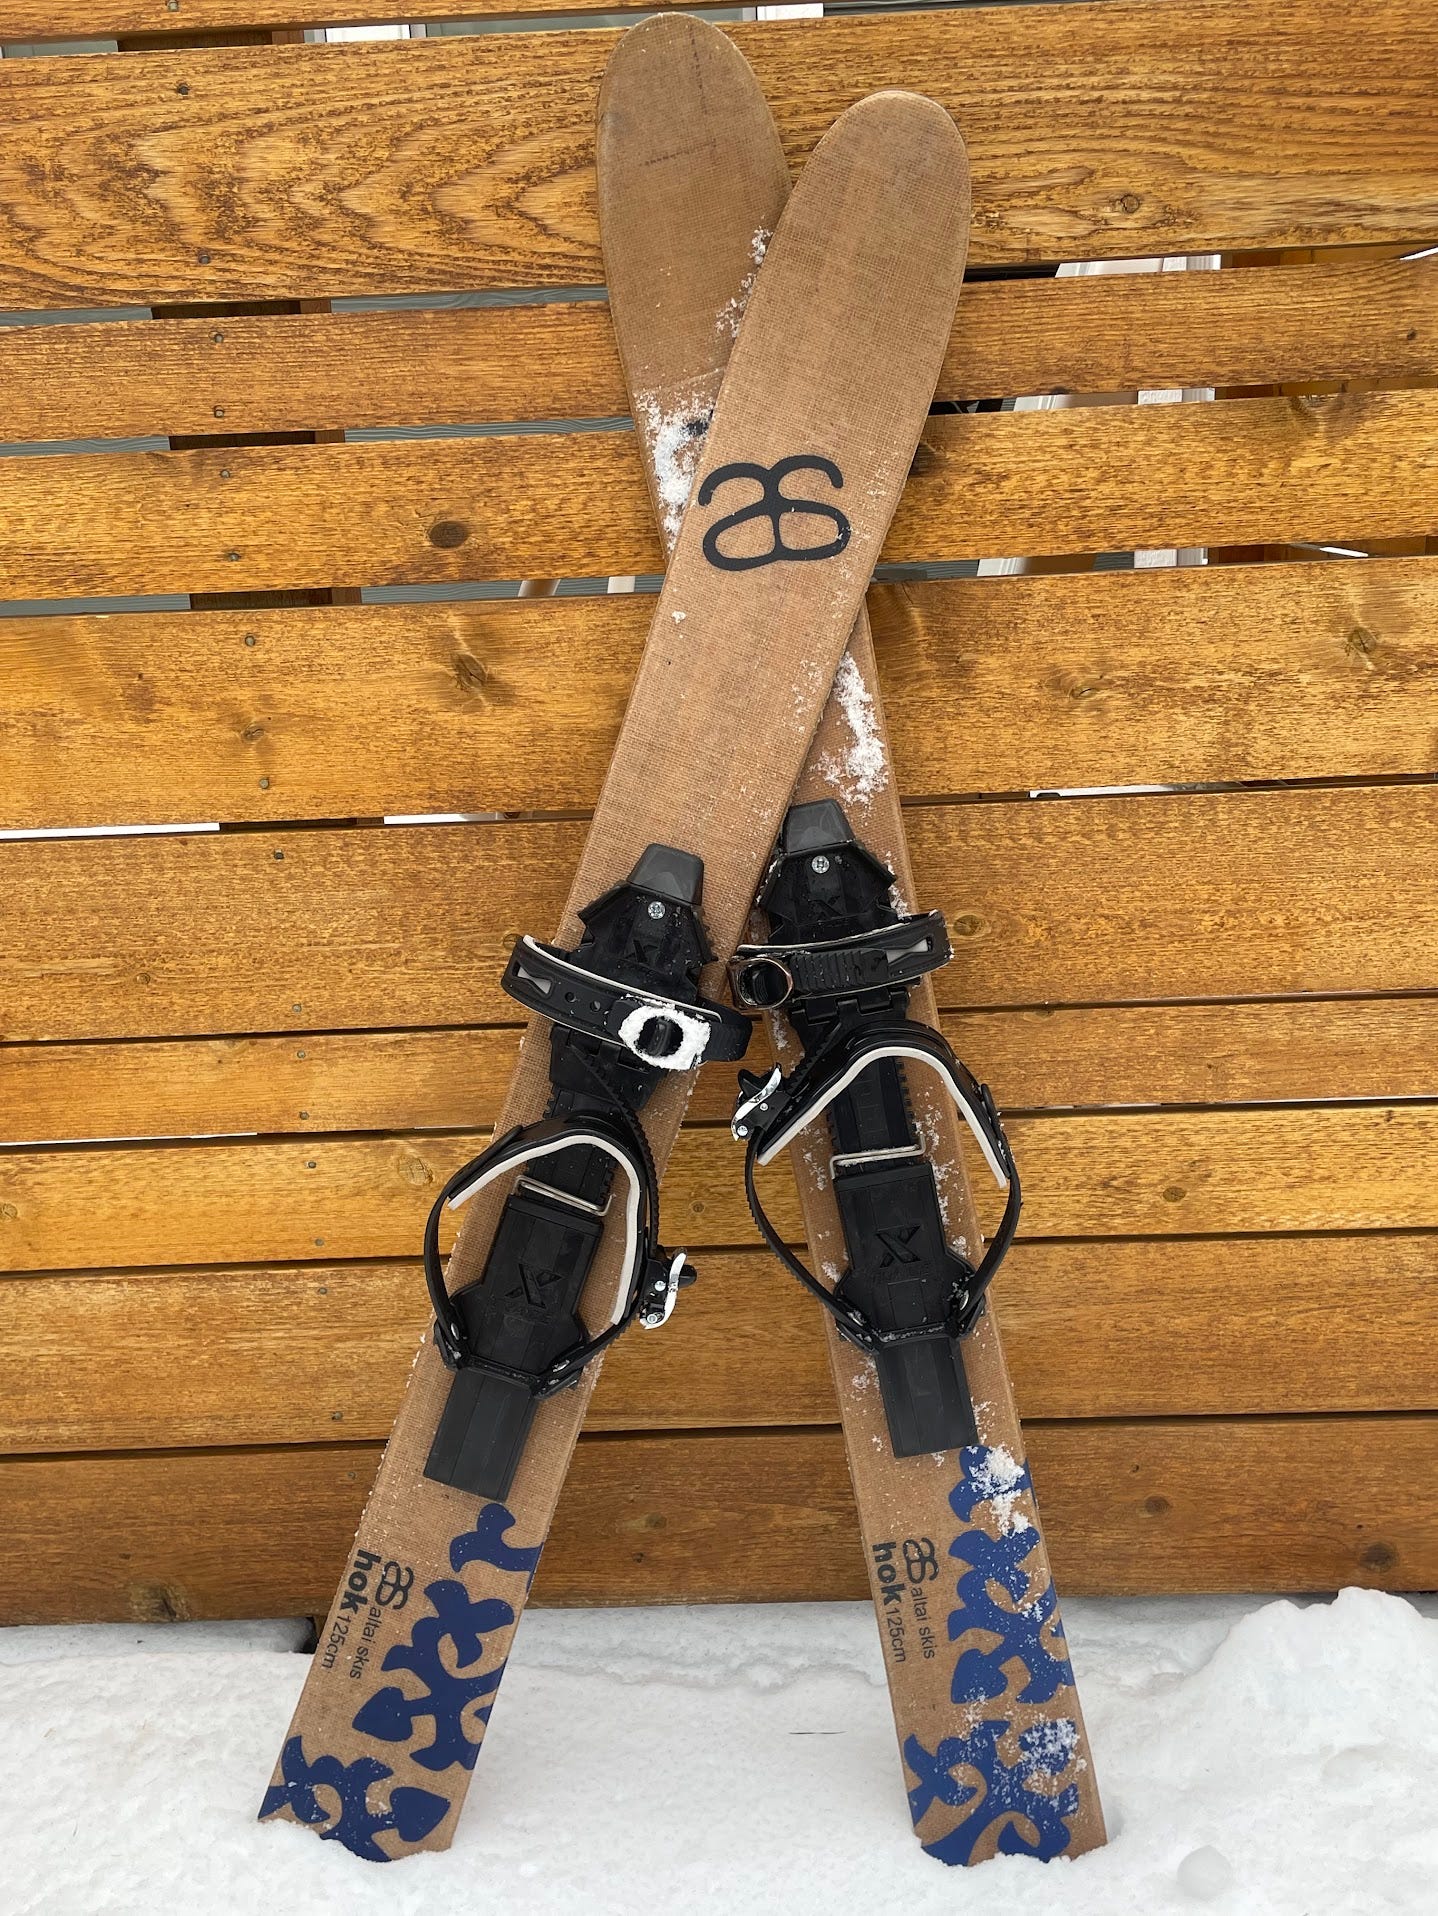 8 Ways to Use Ski Straps in the Backcountry